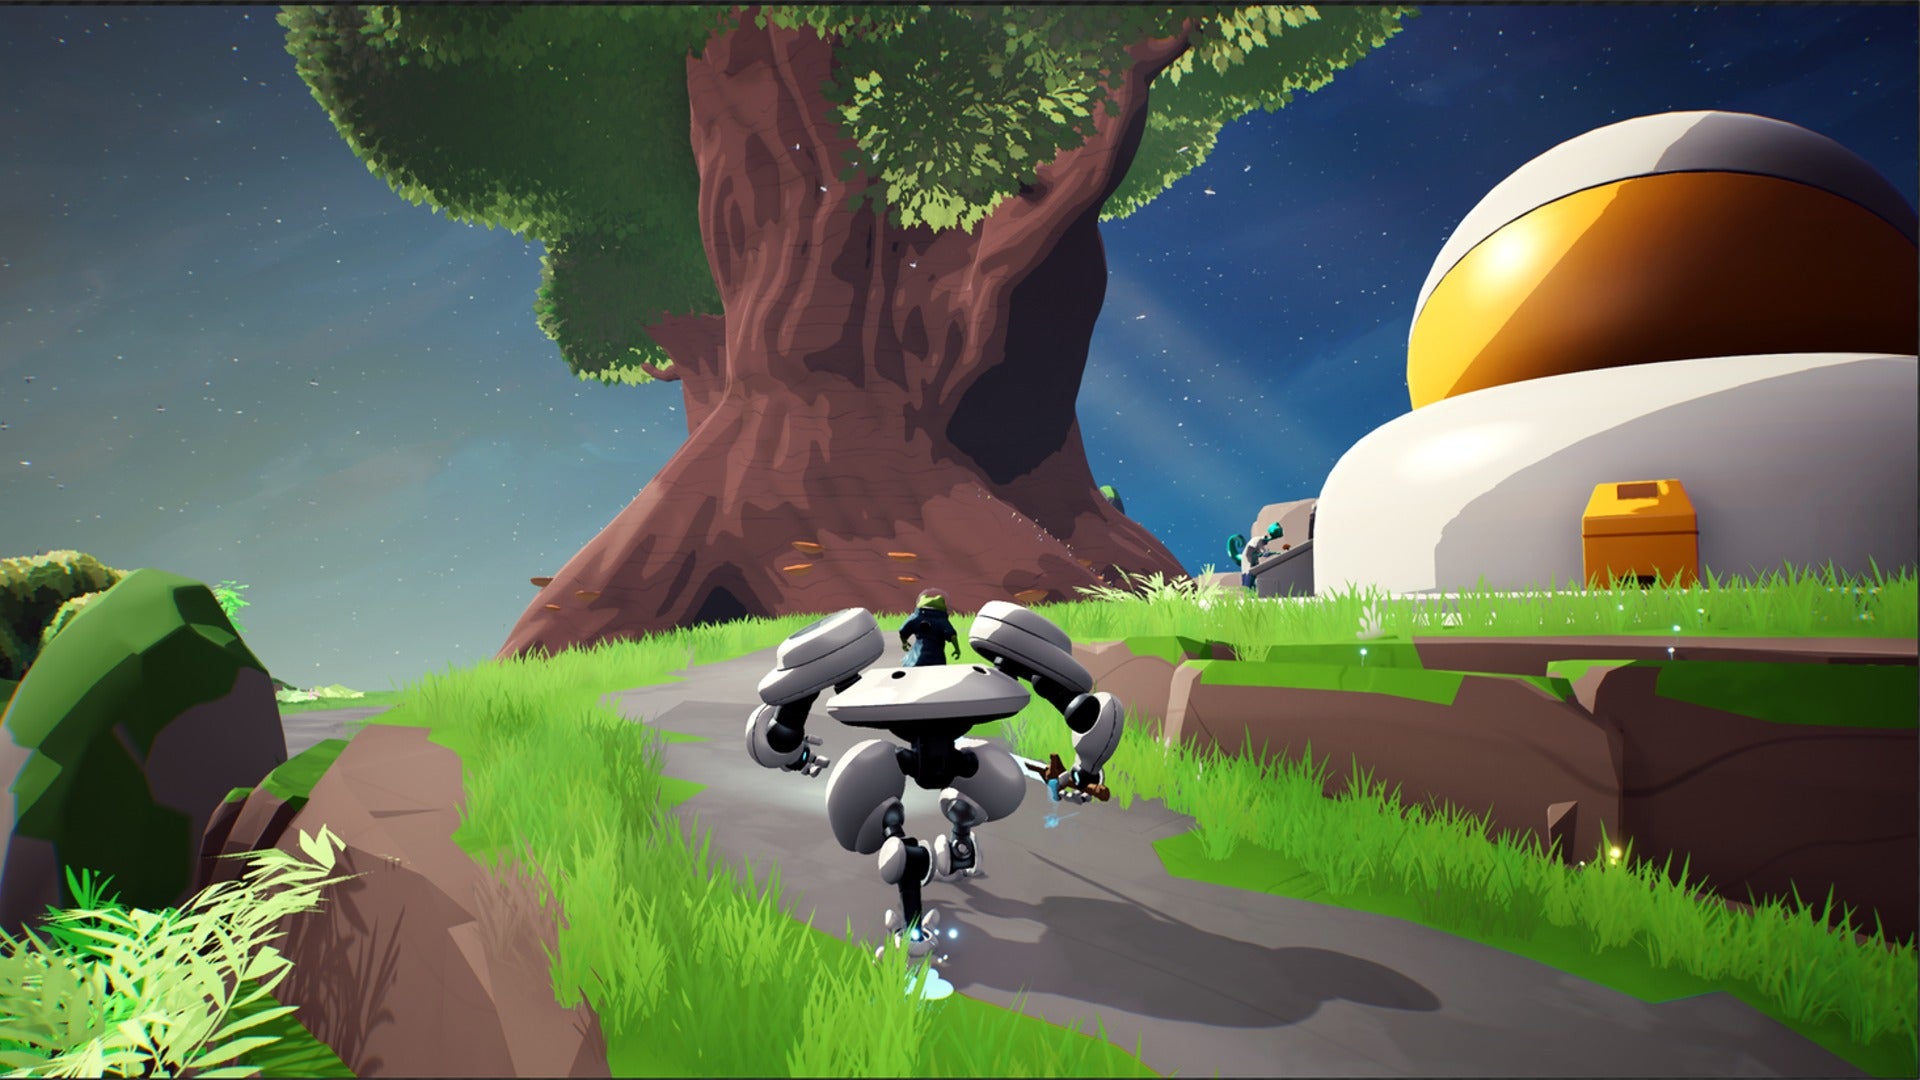 Shoulders of Giants is an action co-op game about a frog riding a robot.